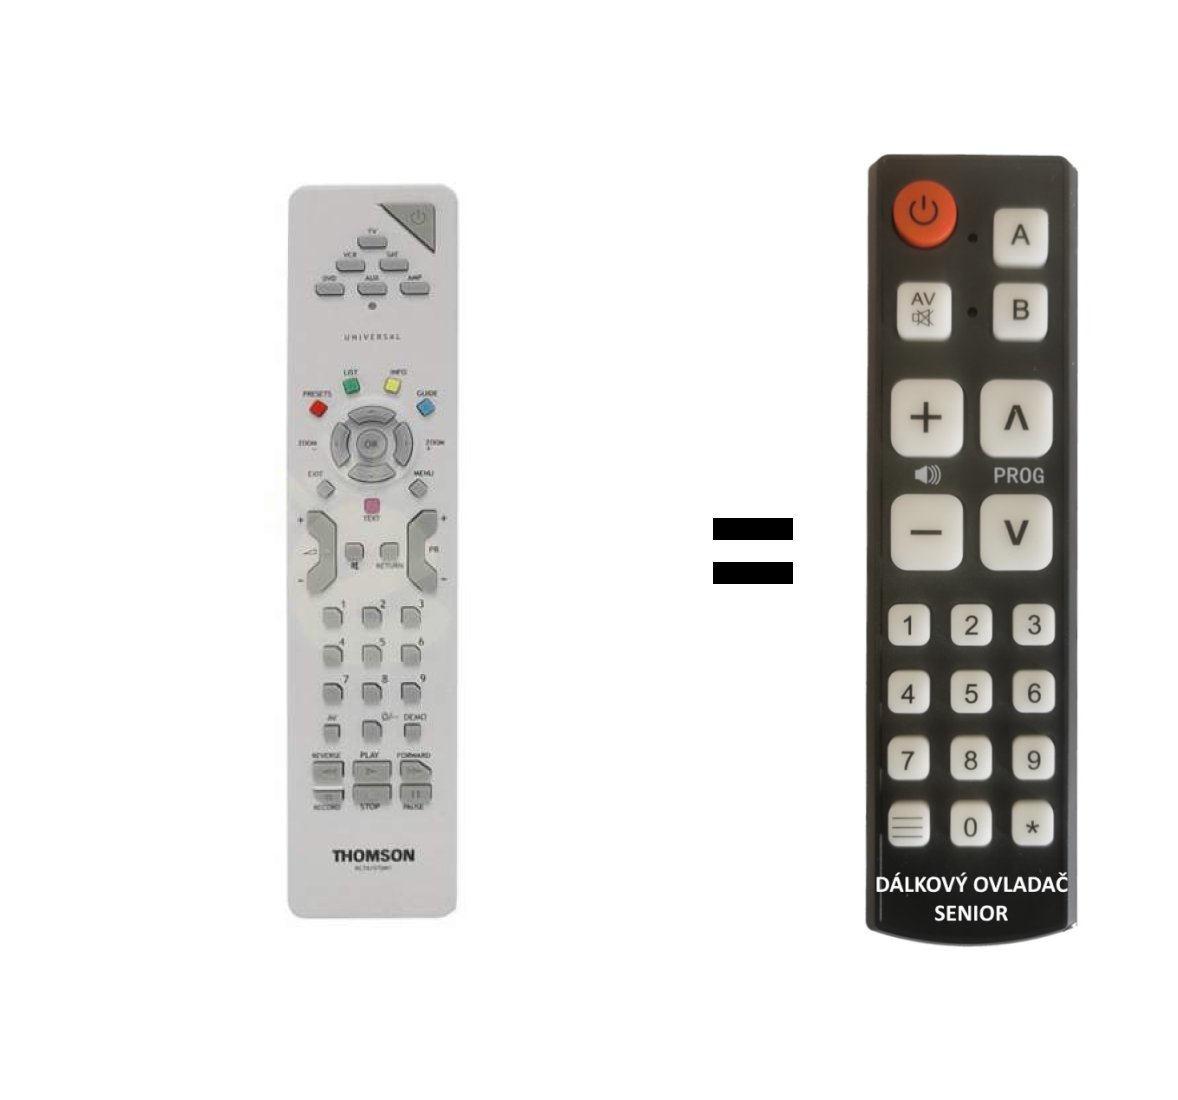 Thomson RCT615TDM1 replacement remote control for seniors